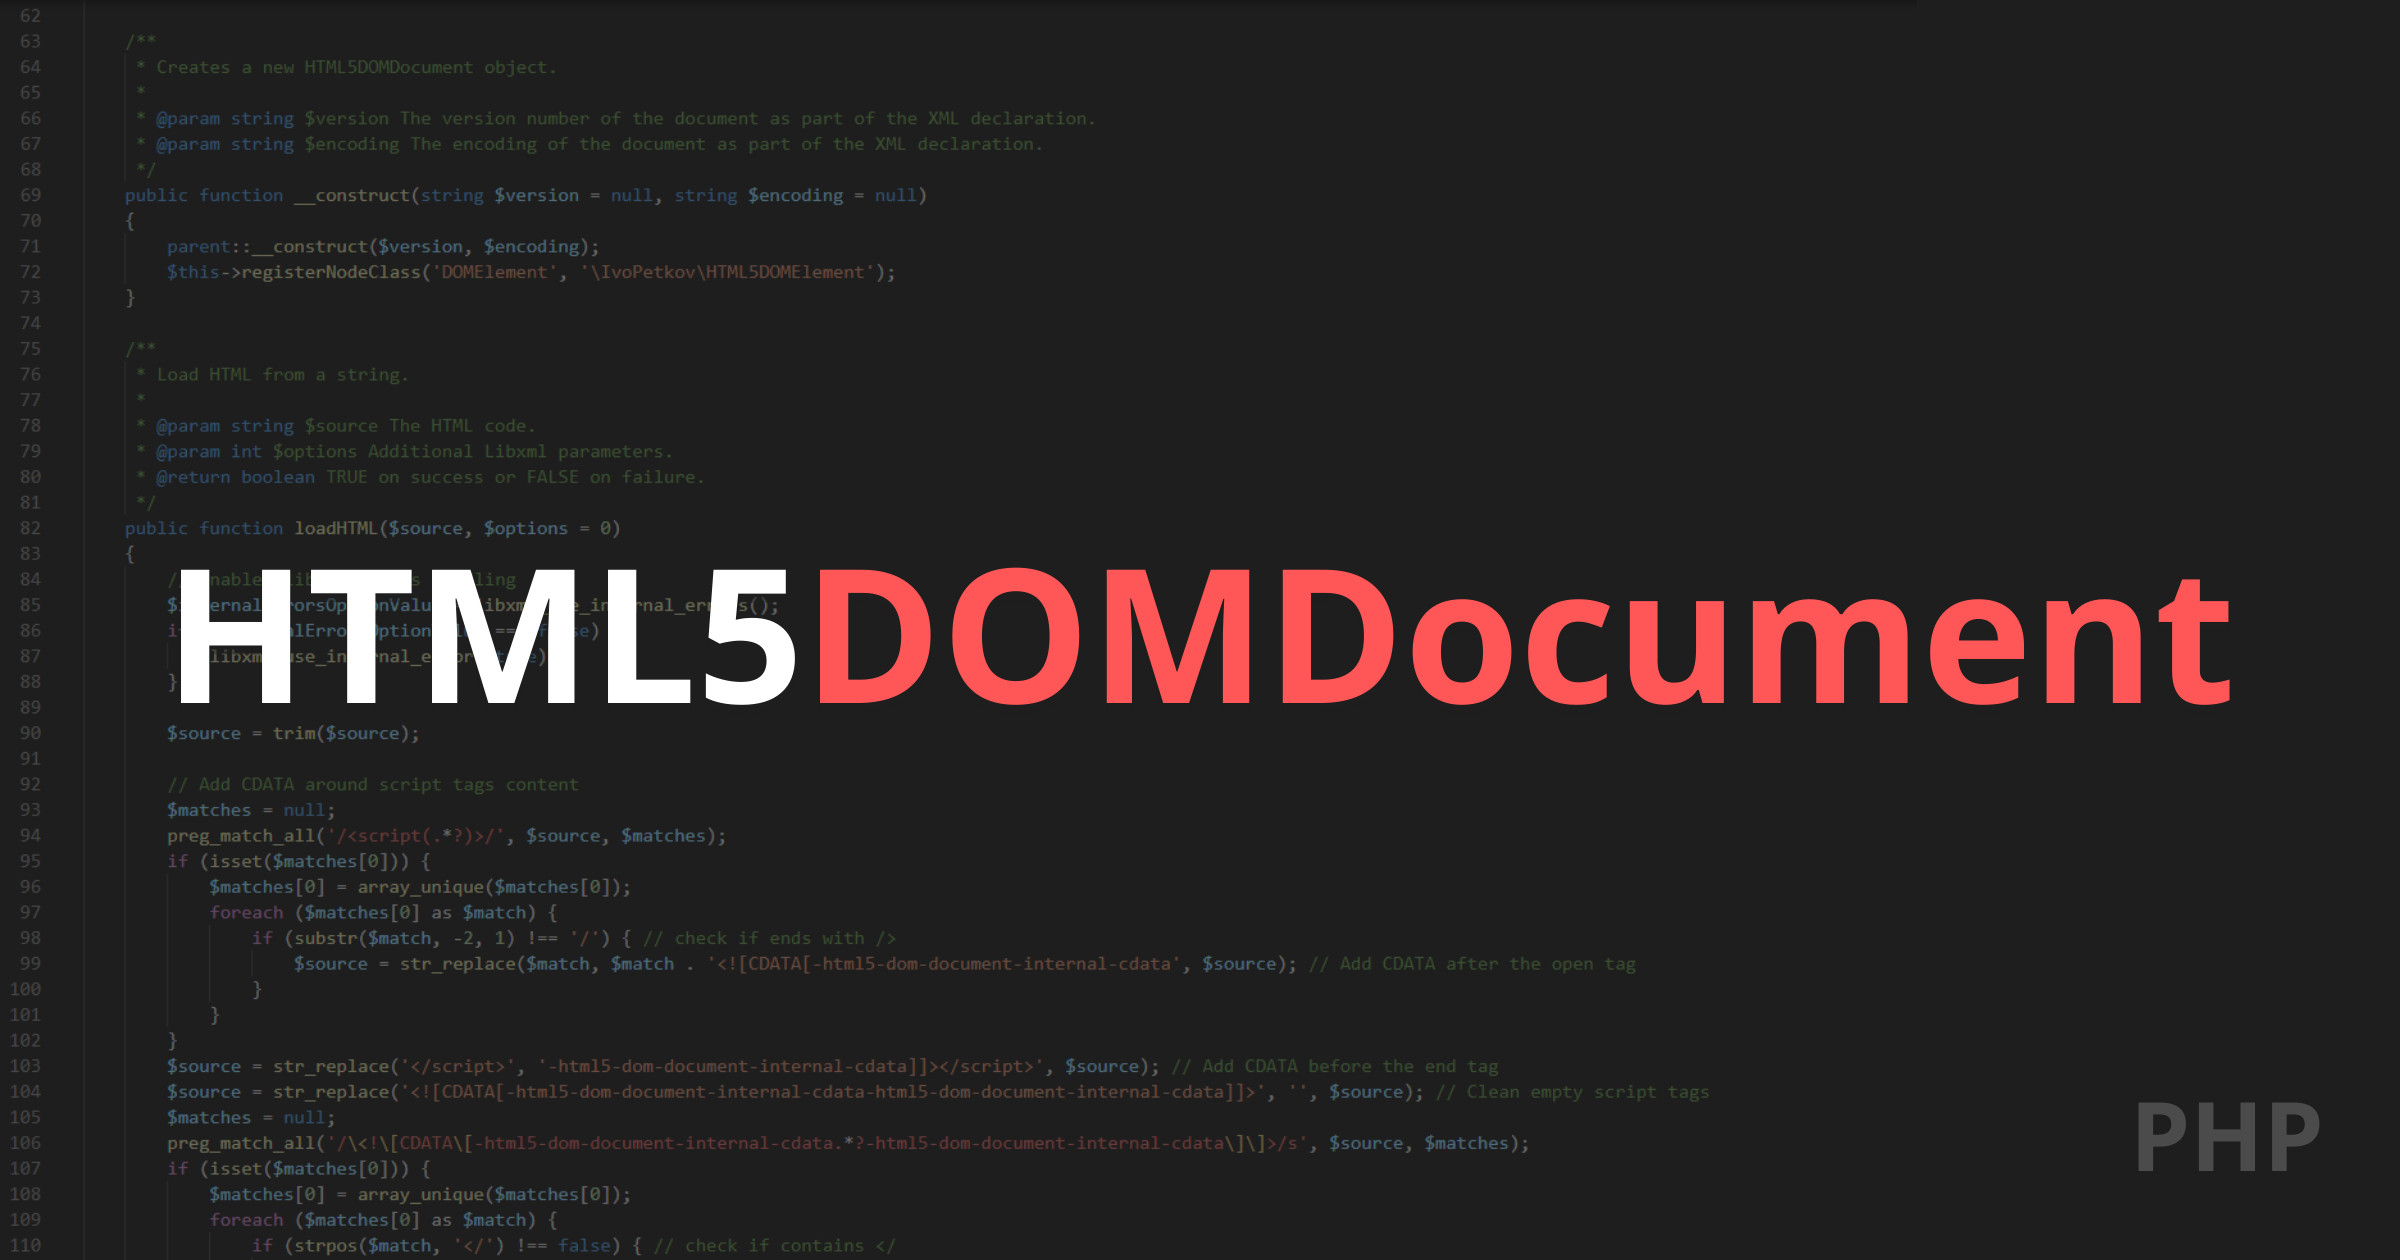 HTML5DOMDocument is a PHP library for parsing and manipulating HTML